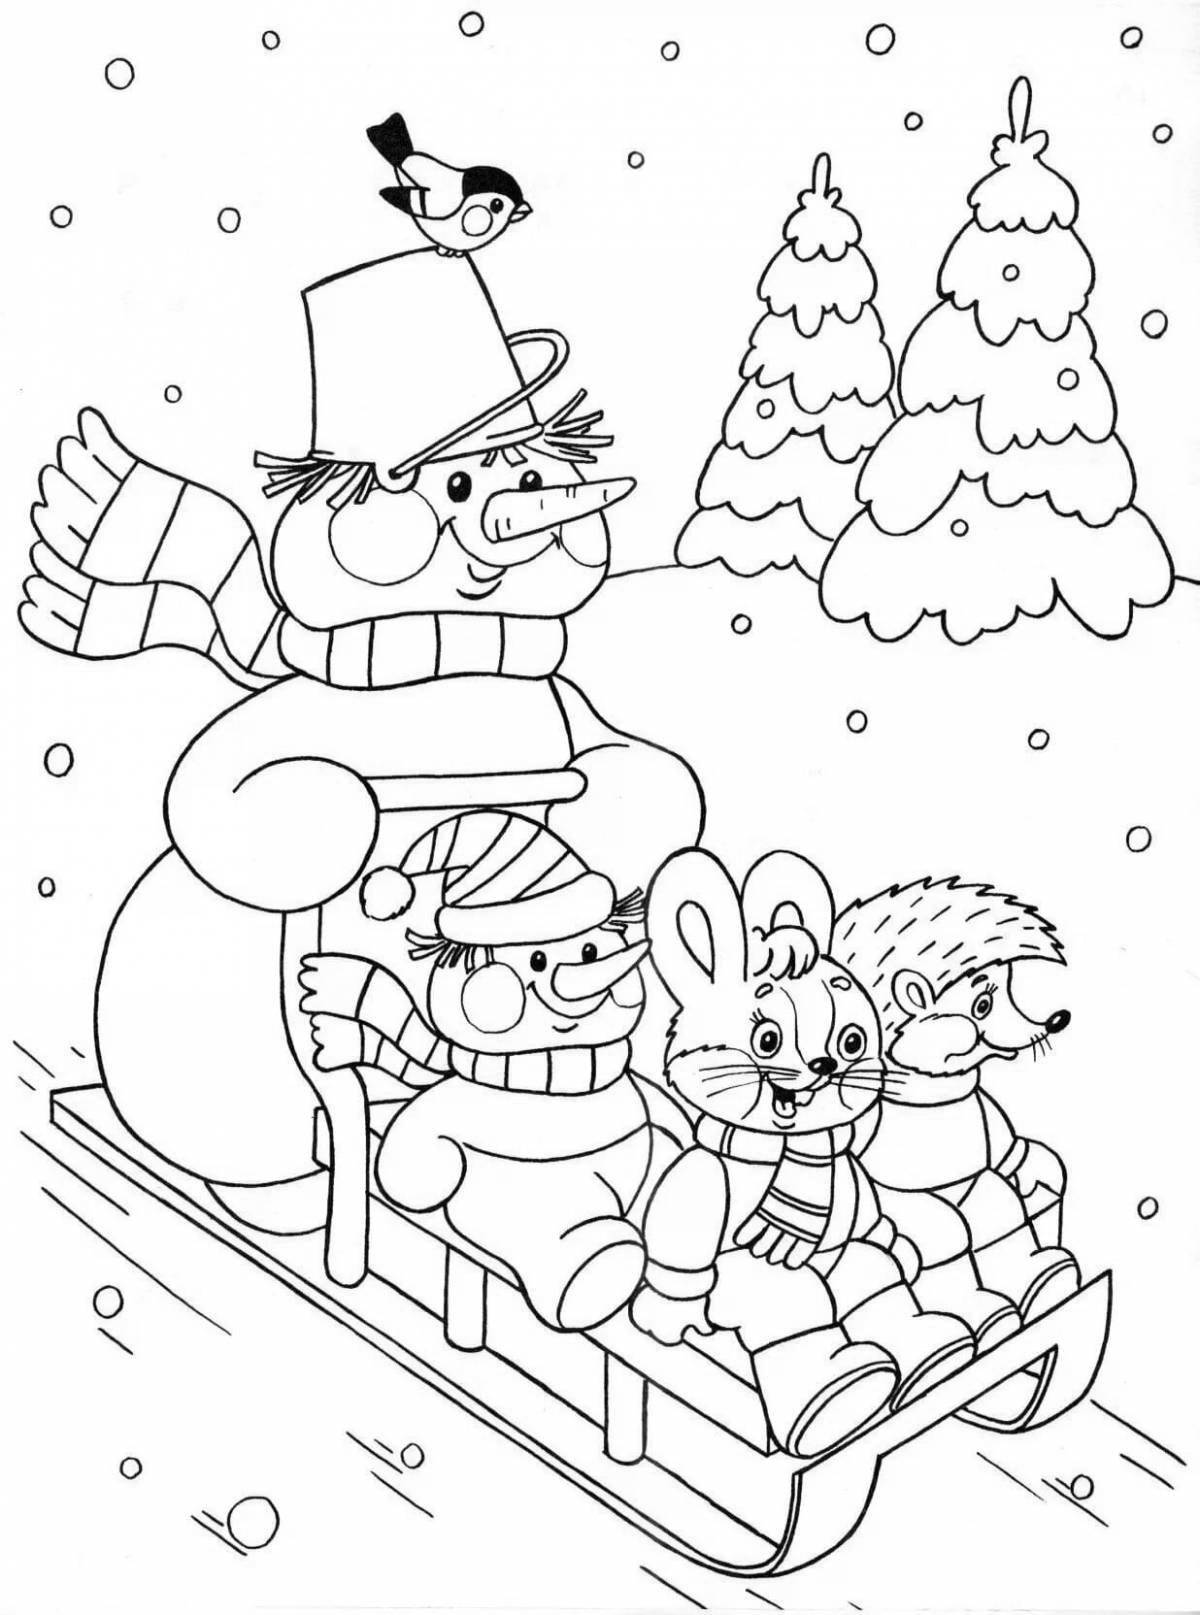 Colorful winter Christmas coloring book